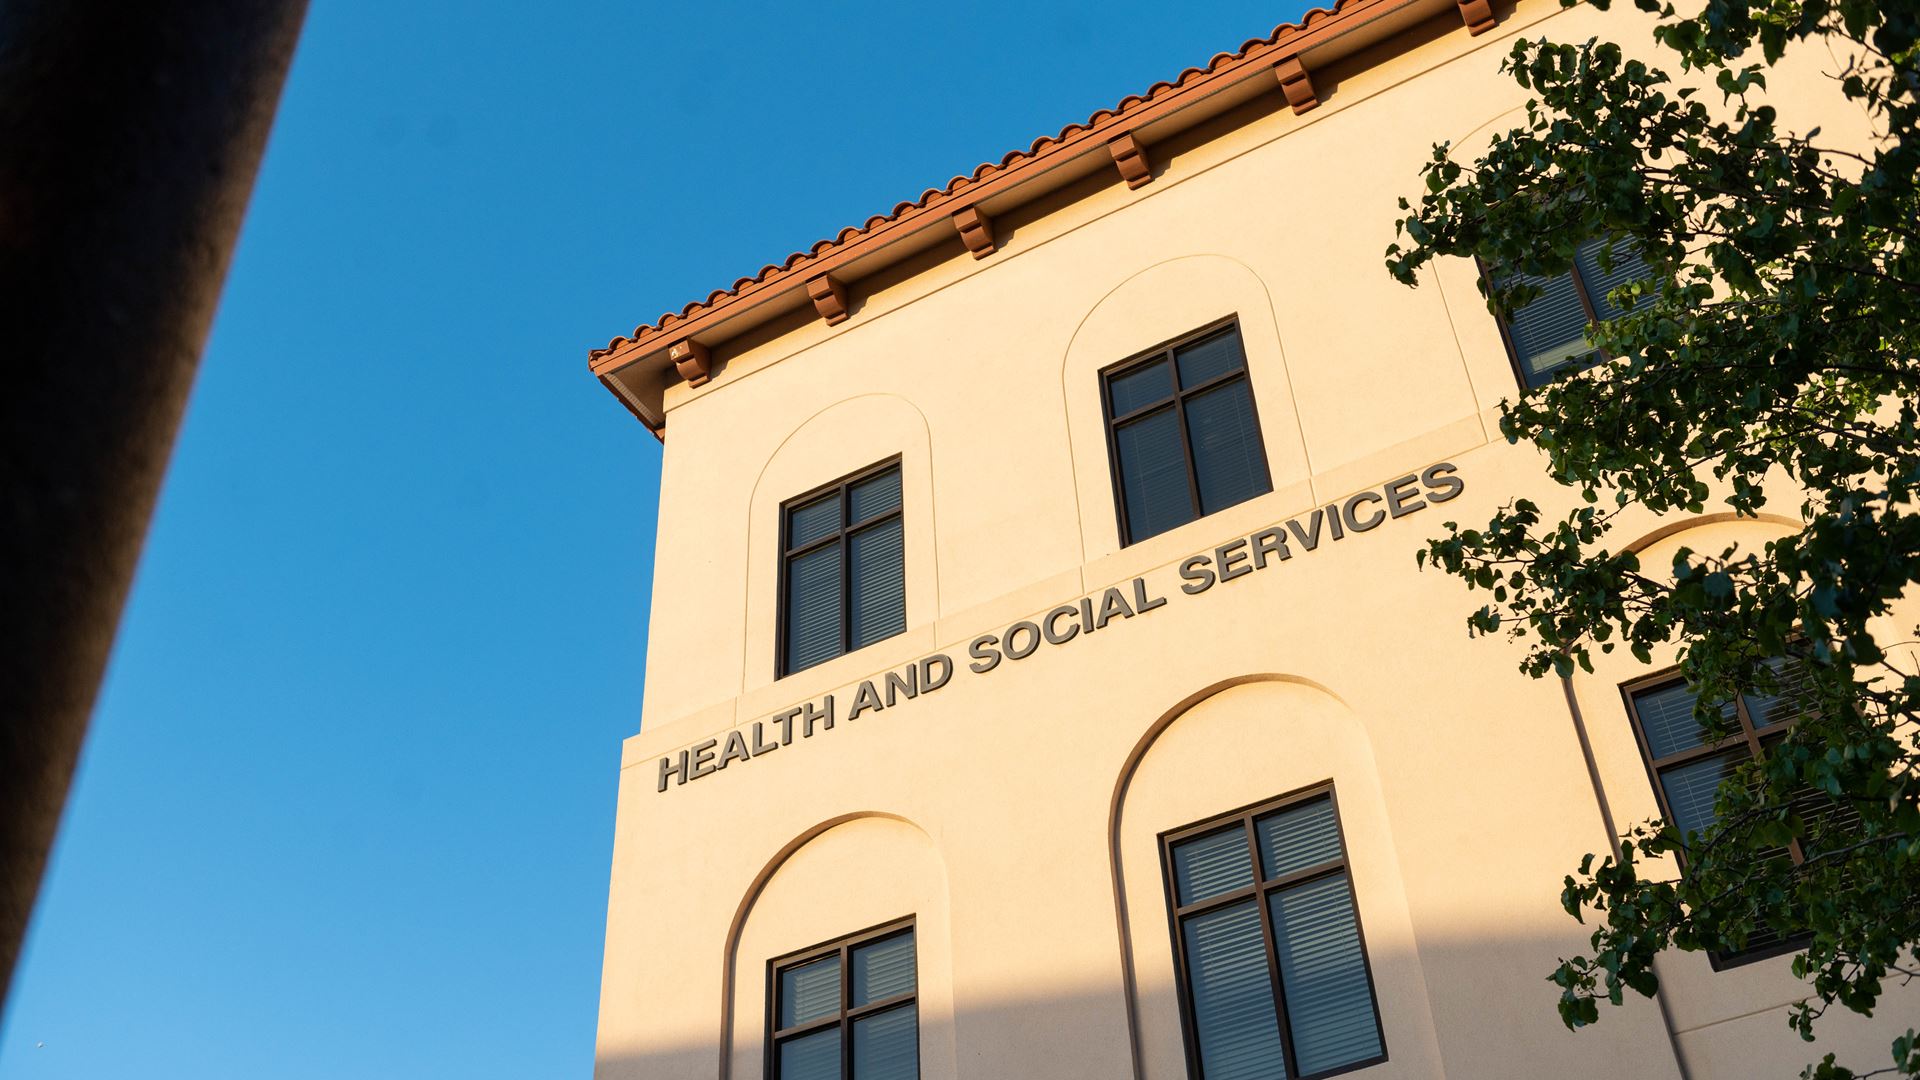 Health and Social Services Building